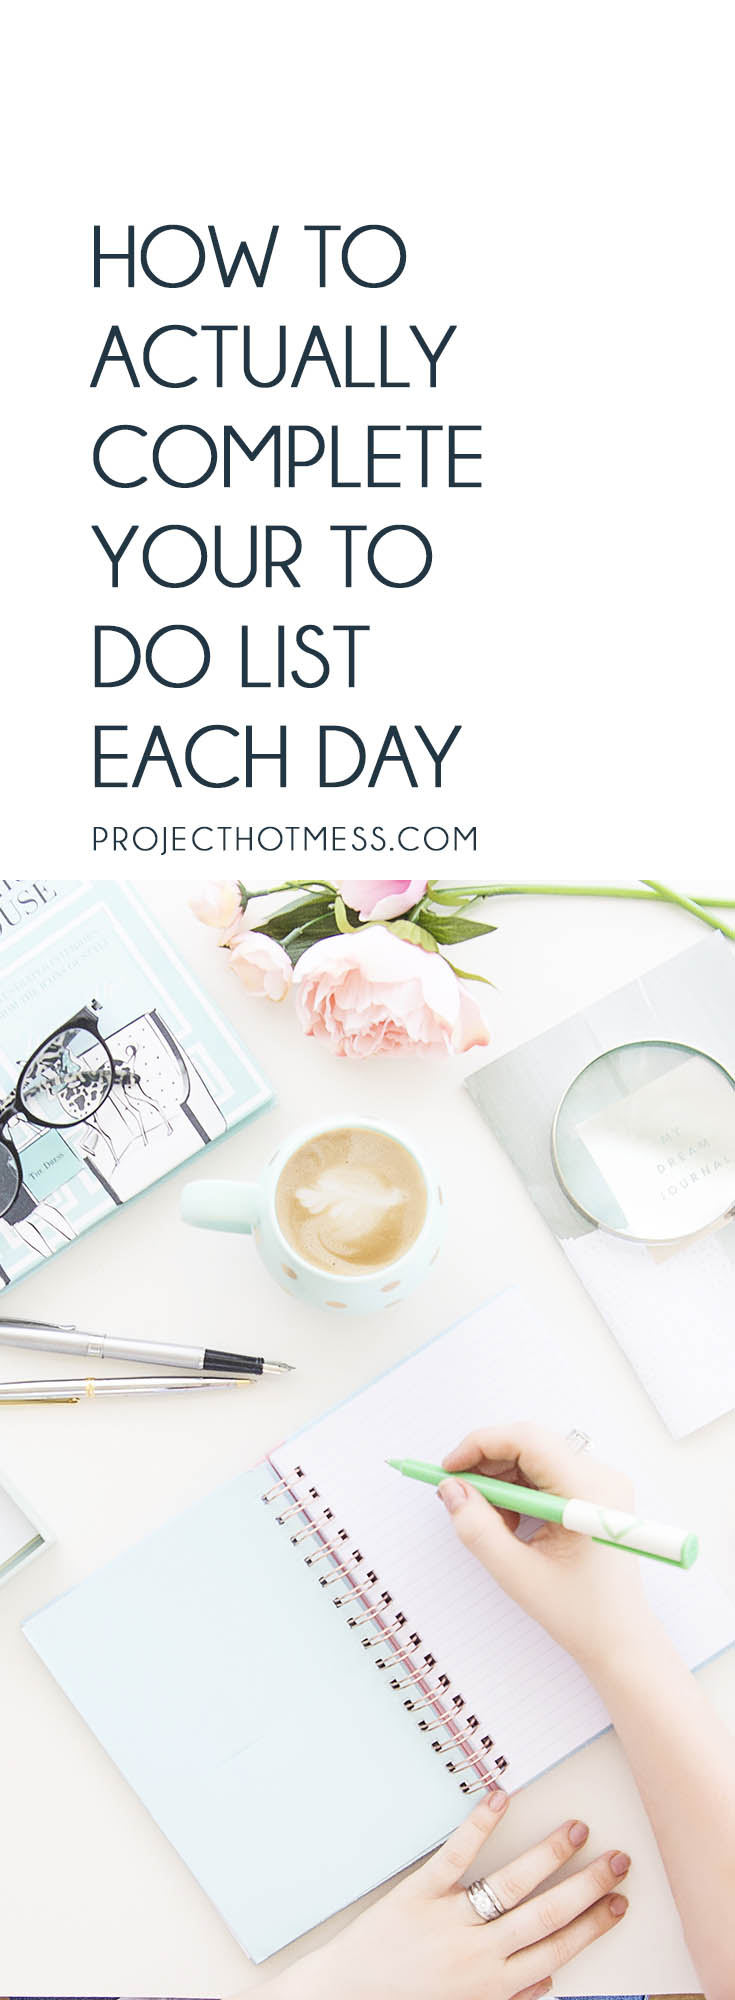 Learn how you can actually complete your to do list each day. Give yourself a greater sense of achievement, after all your to do list is meant to be done! Productive | To Do List | Organised | Be More Productive | Productivity | To Do List Hacks | Productivity Tips 